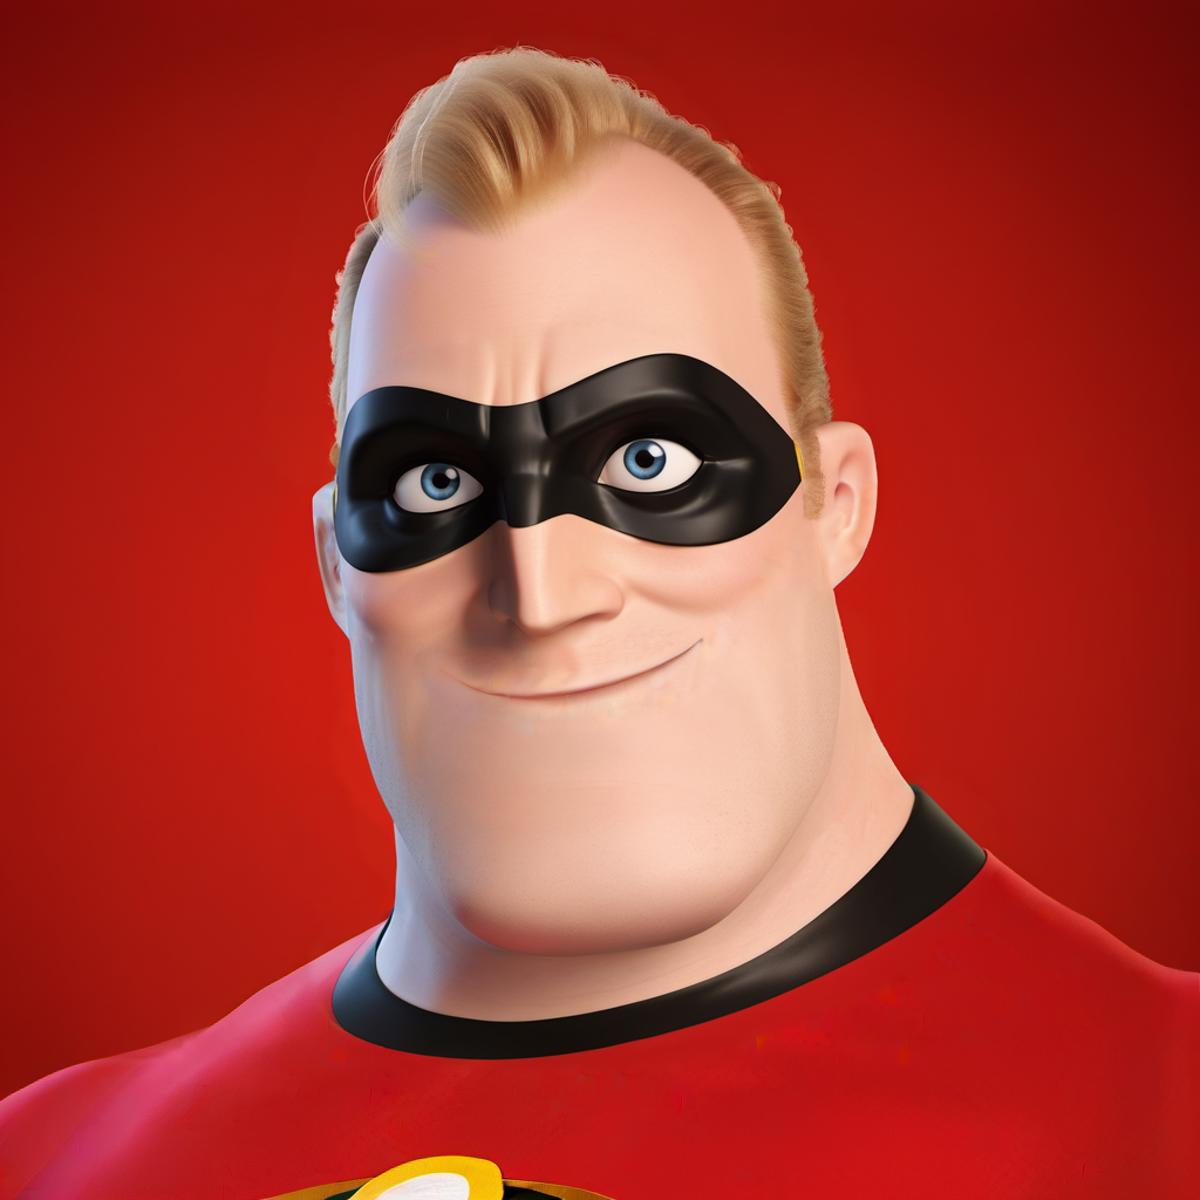 Mr. Incredible - SDXL image by PhotobAIt